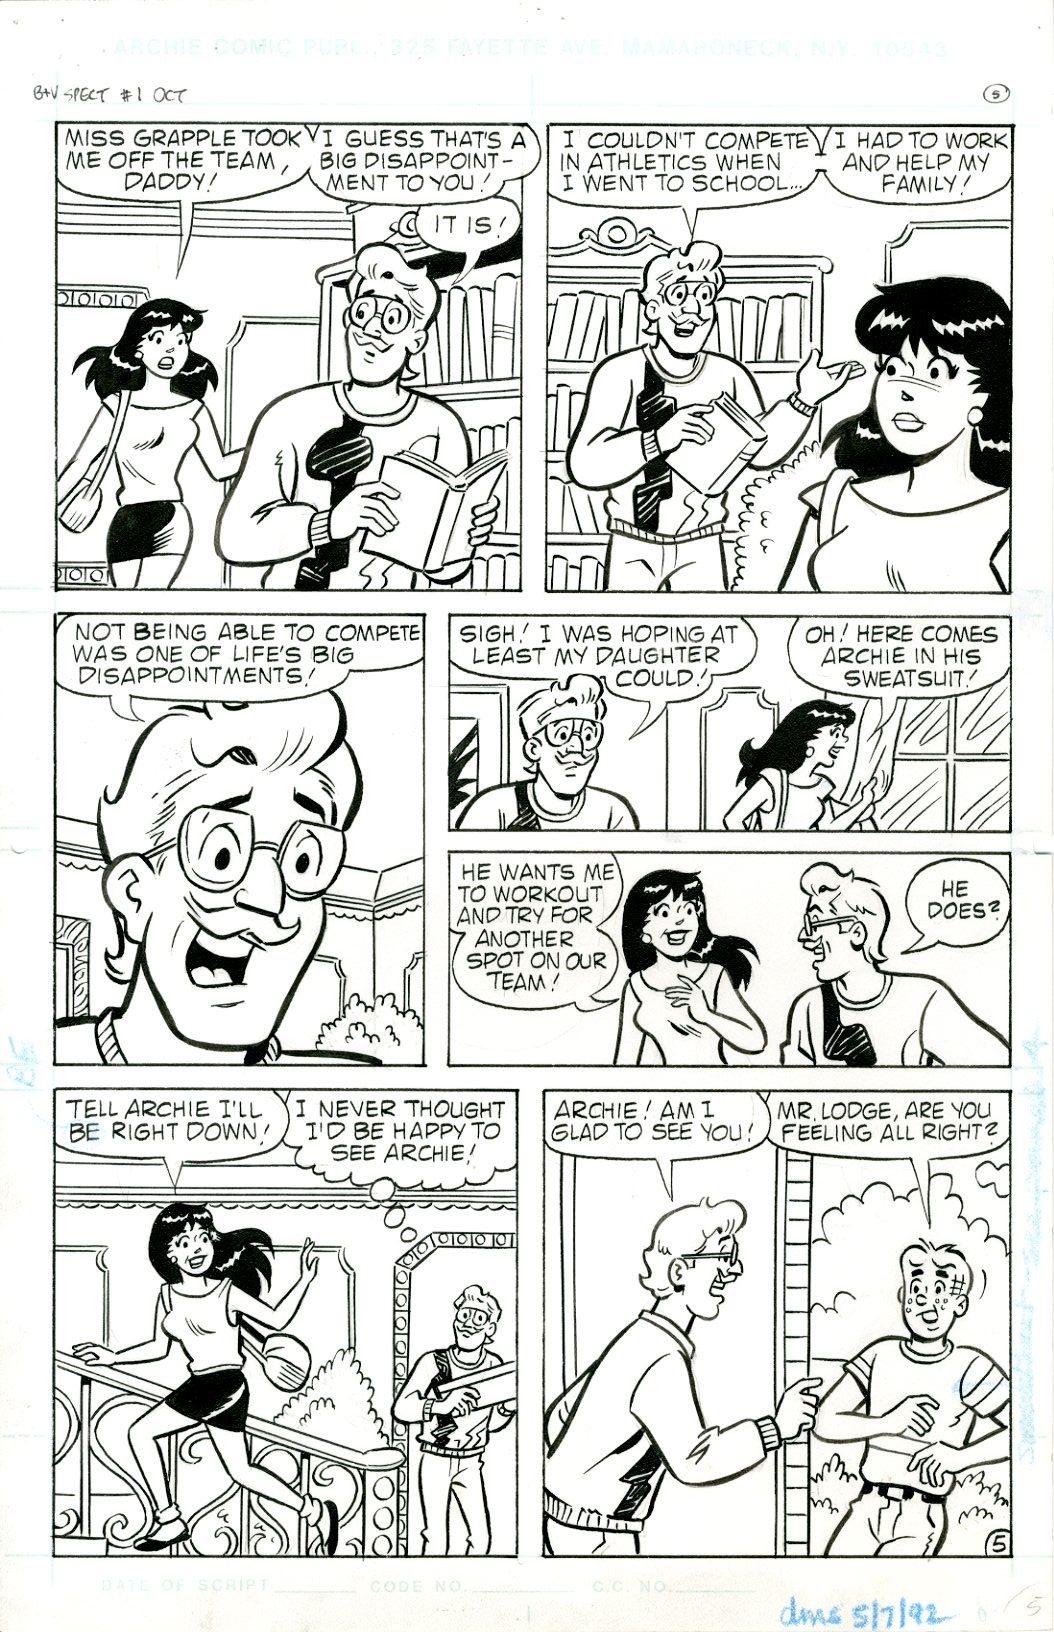 Betty &amp; Veronica Spectacular  6 Page Story - 3594